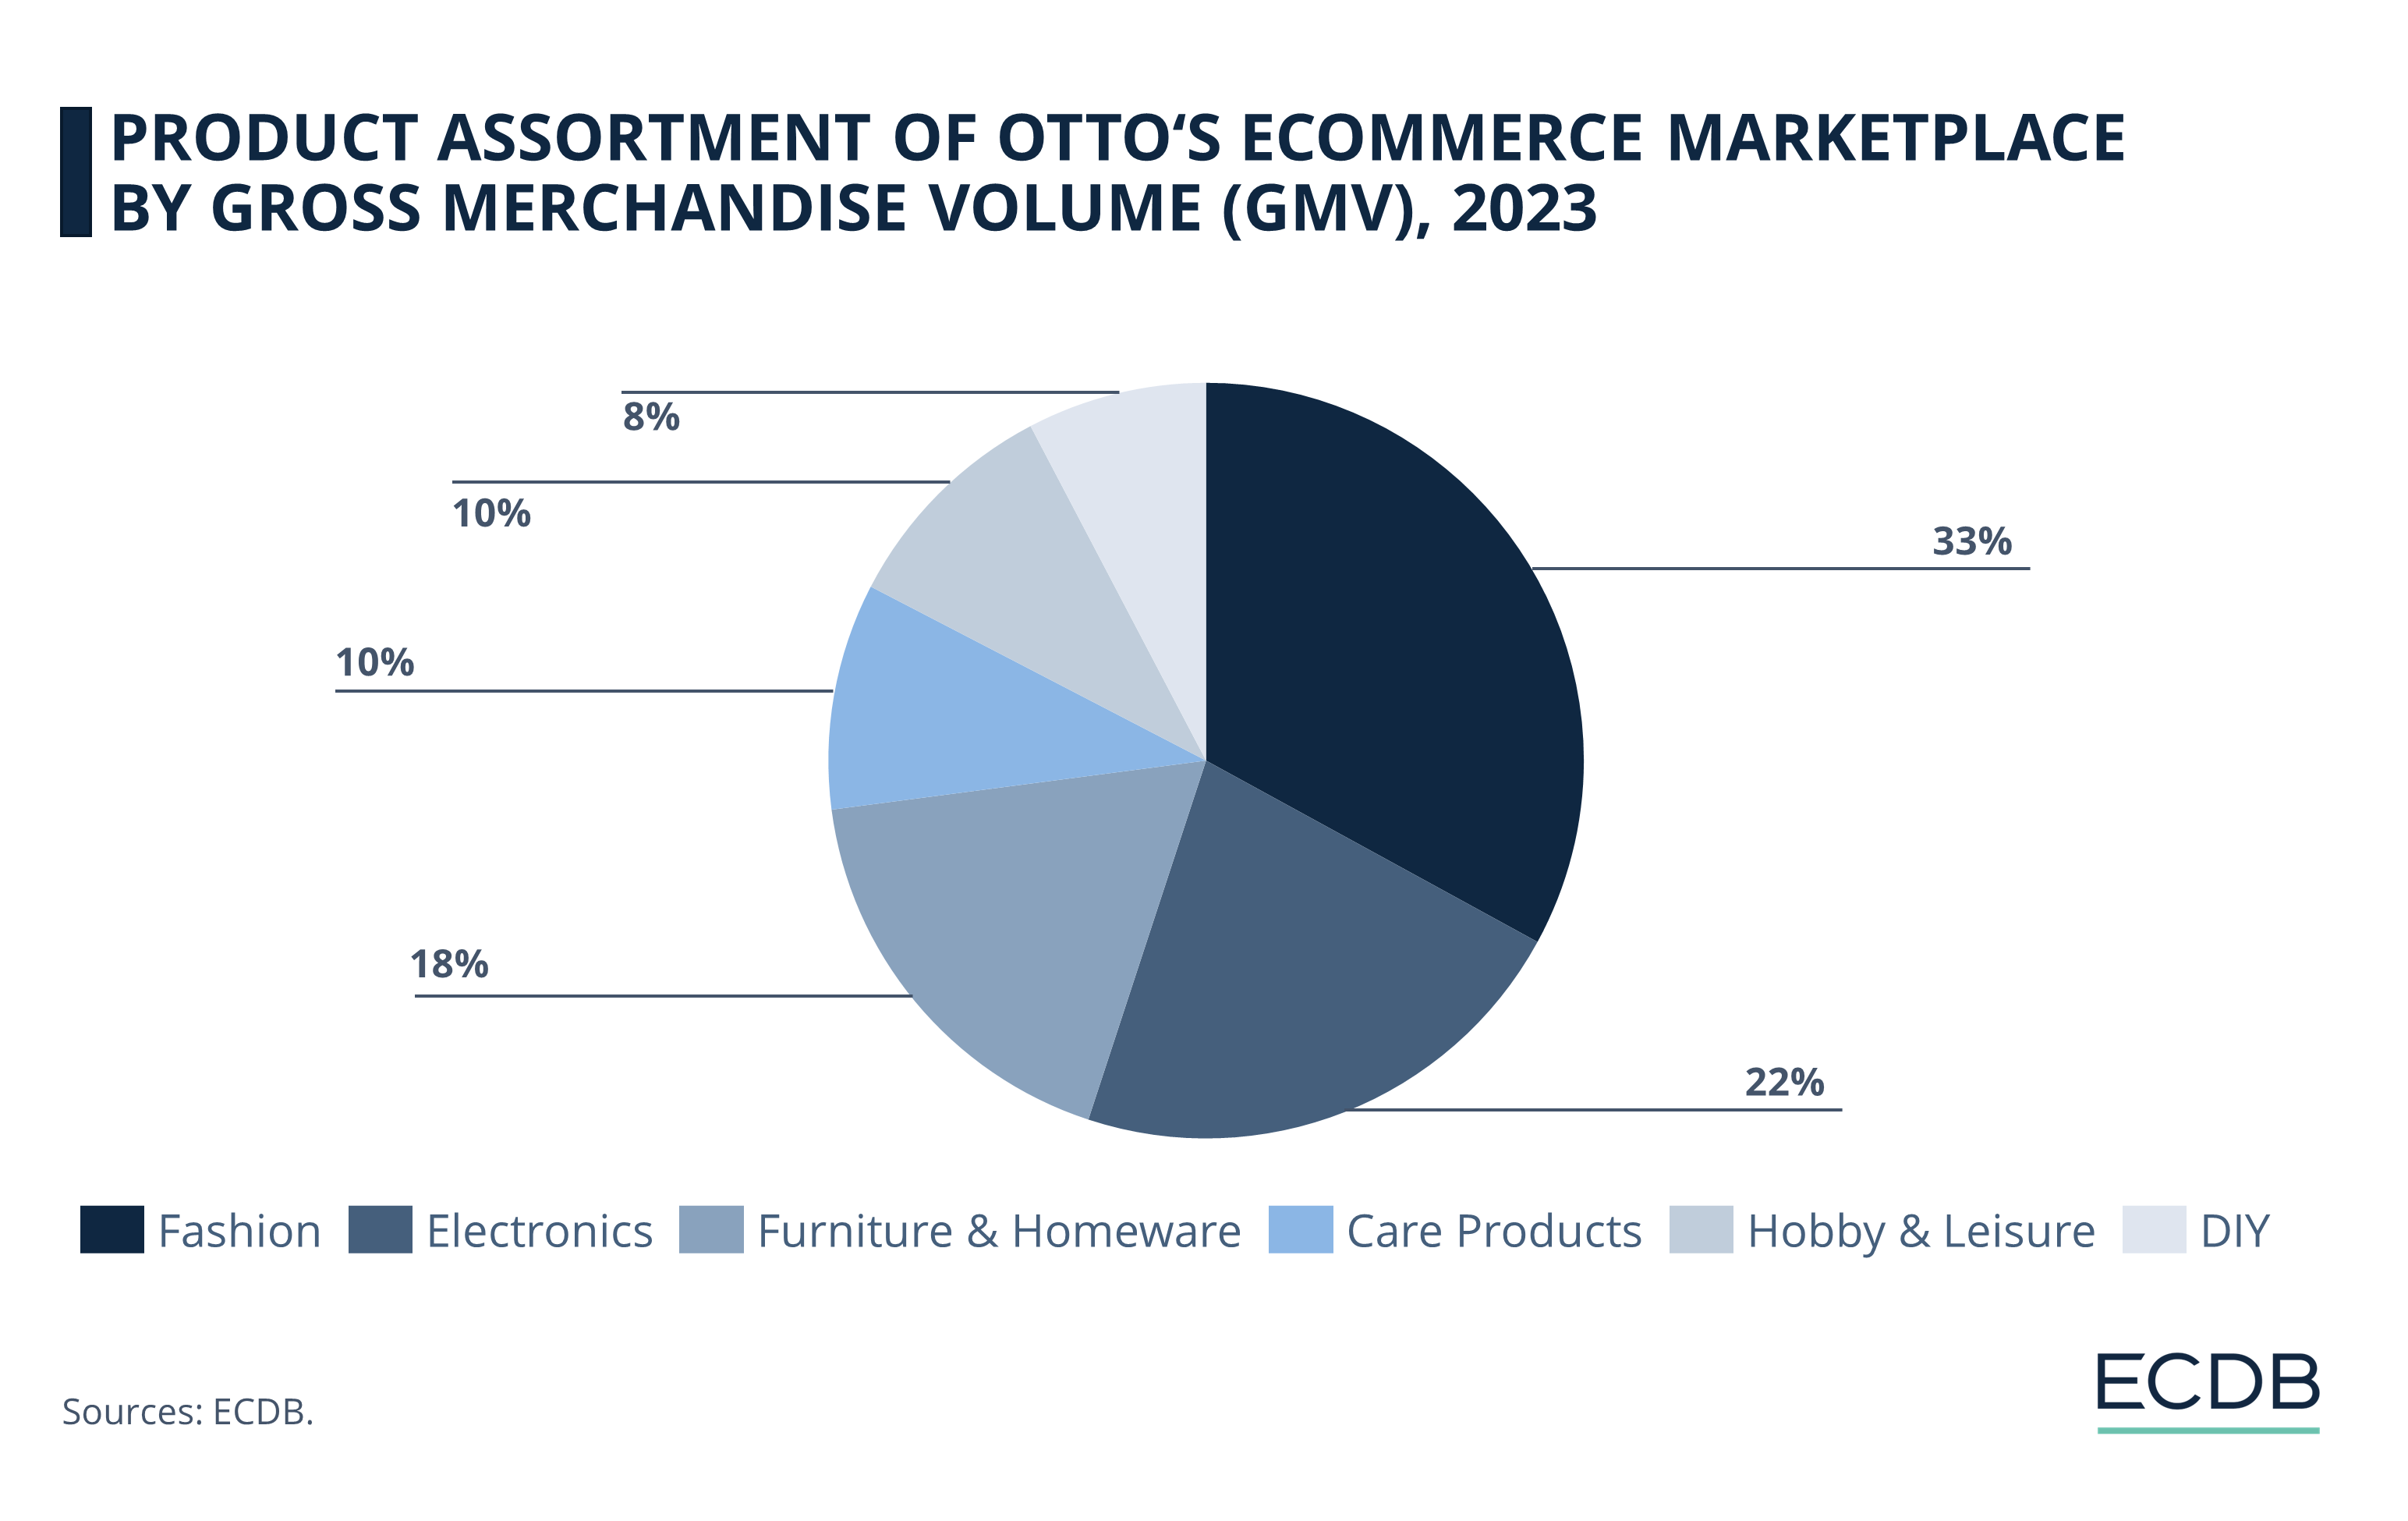 Product Assortment of Otto's eCommerce Marketplace by GMV, 2023